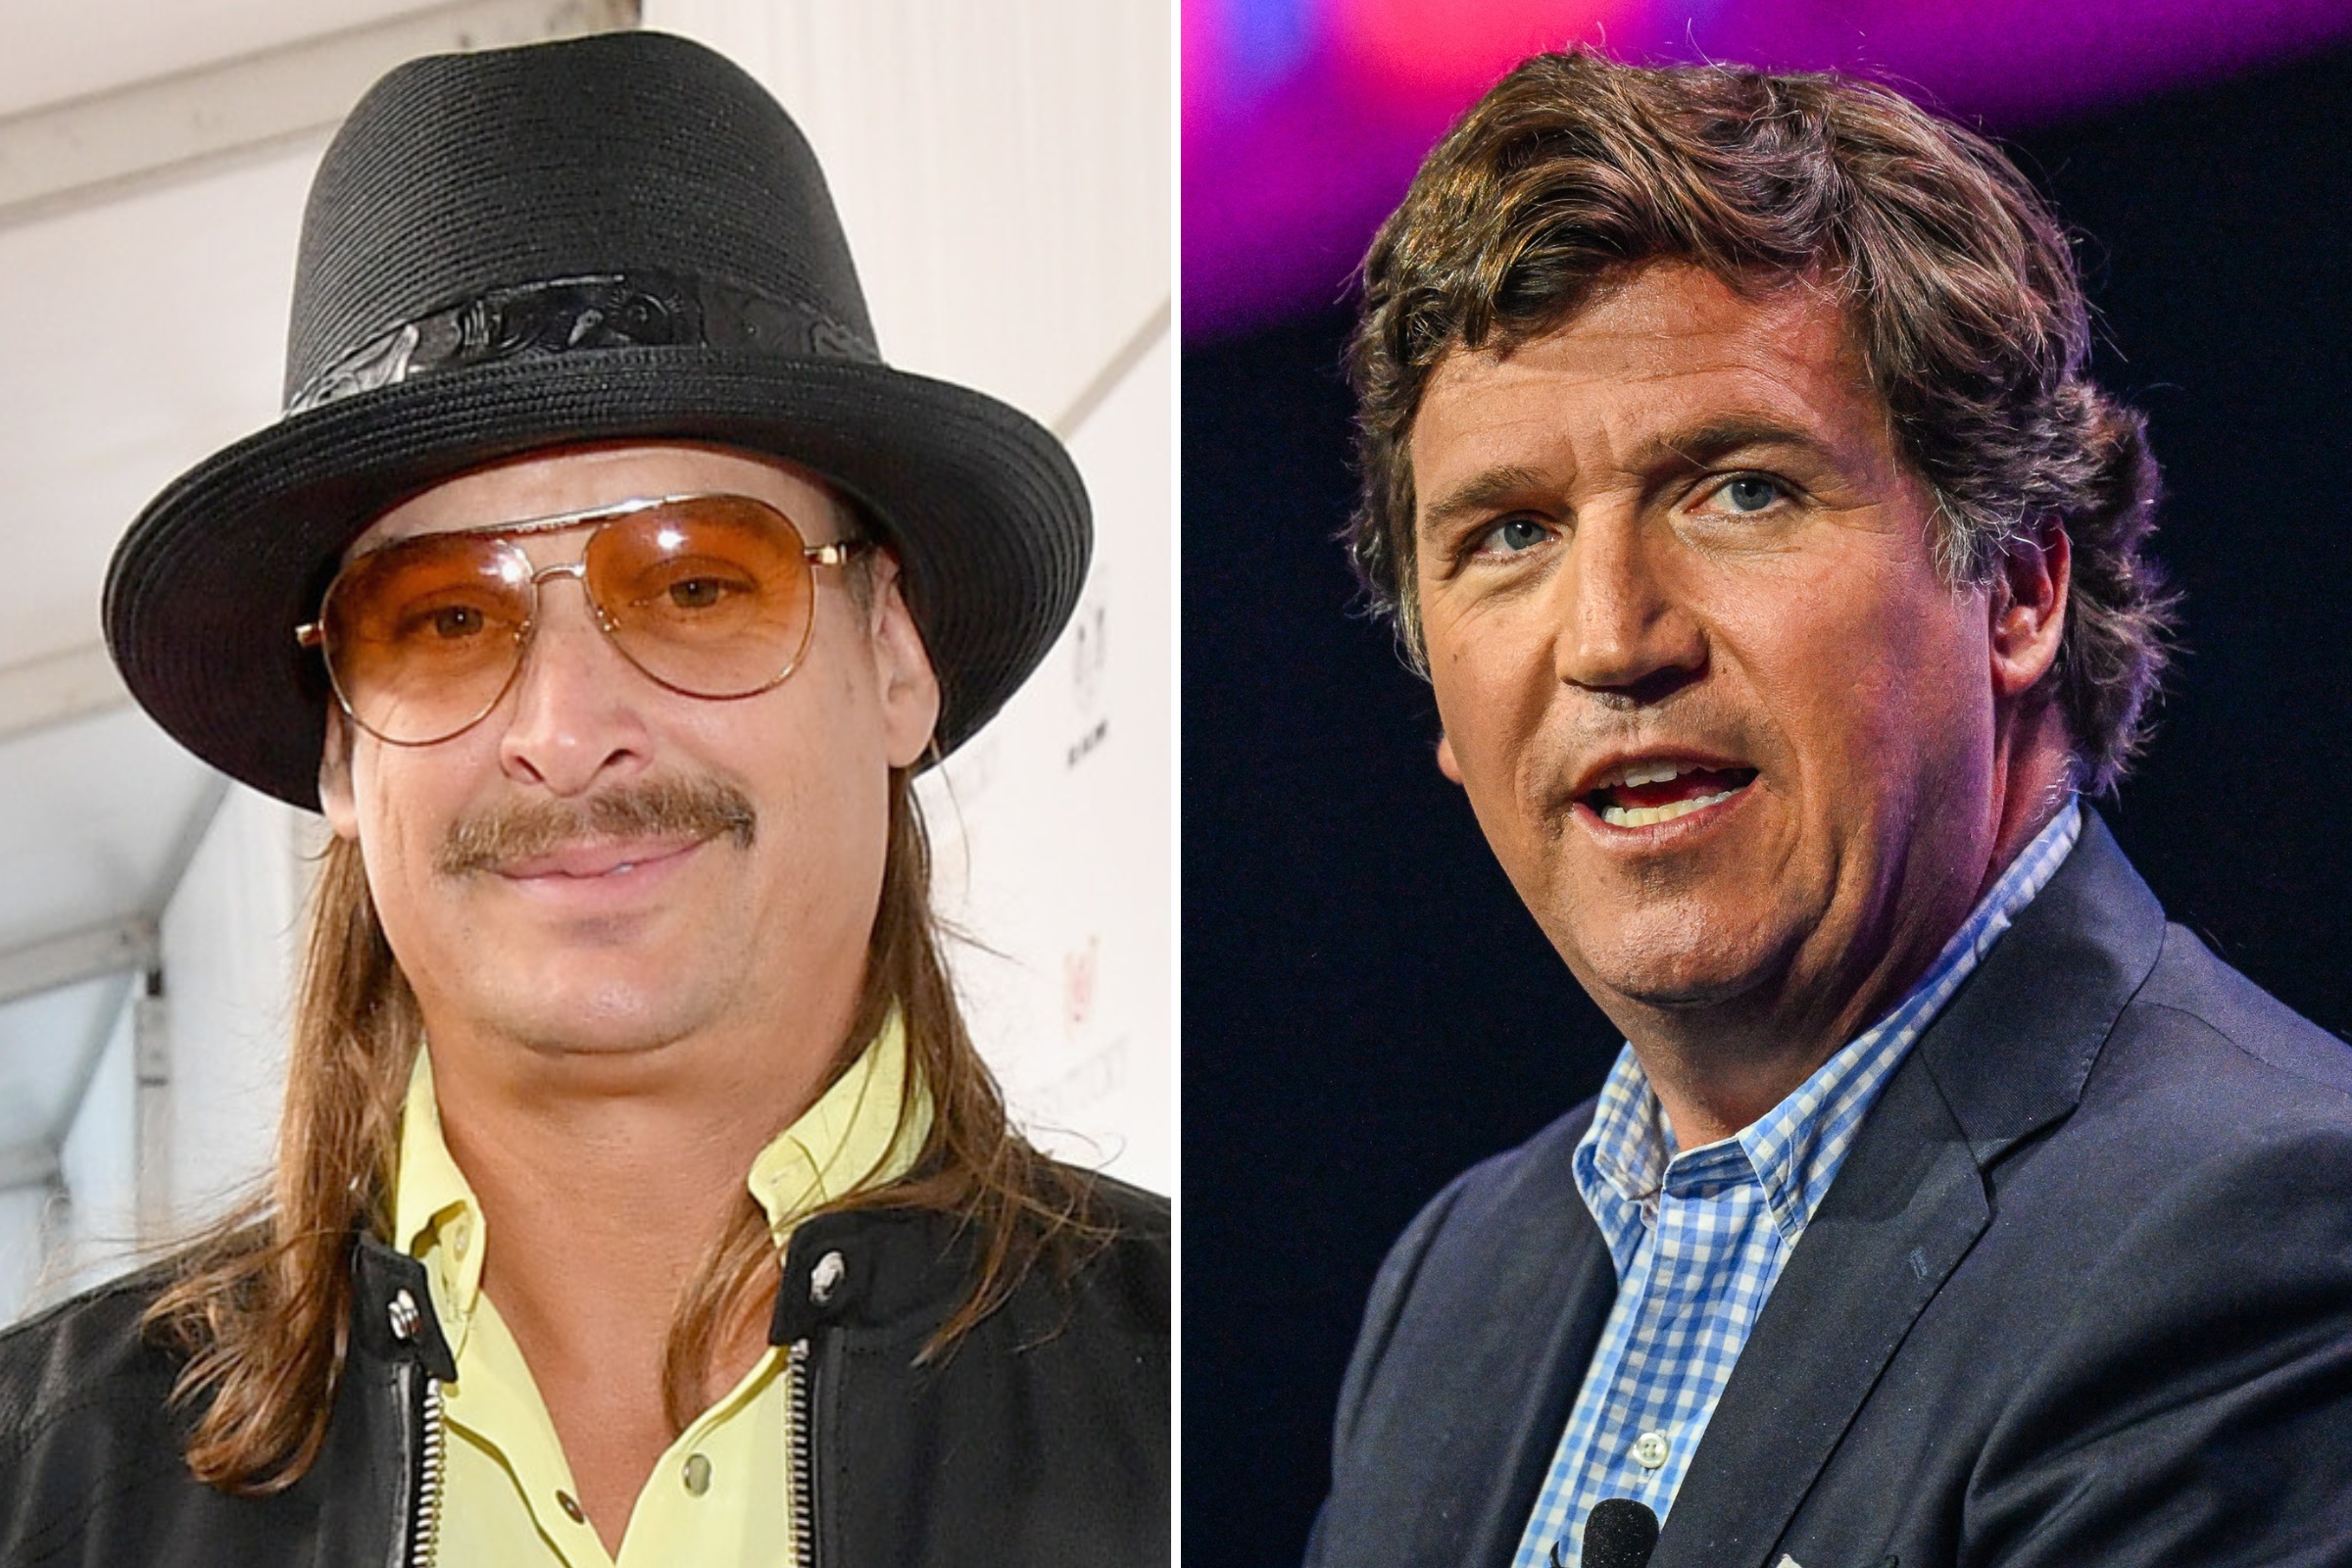 Tucker Carlson comments go viral as Kid Rock’s opening act